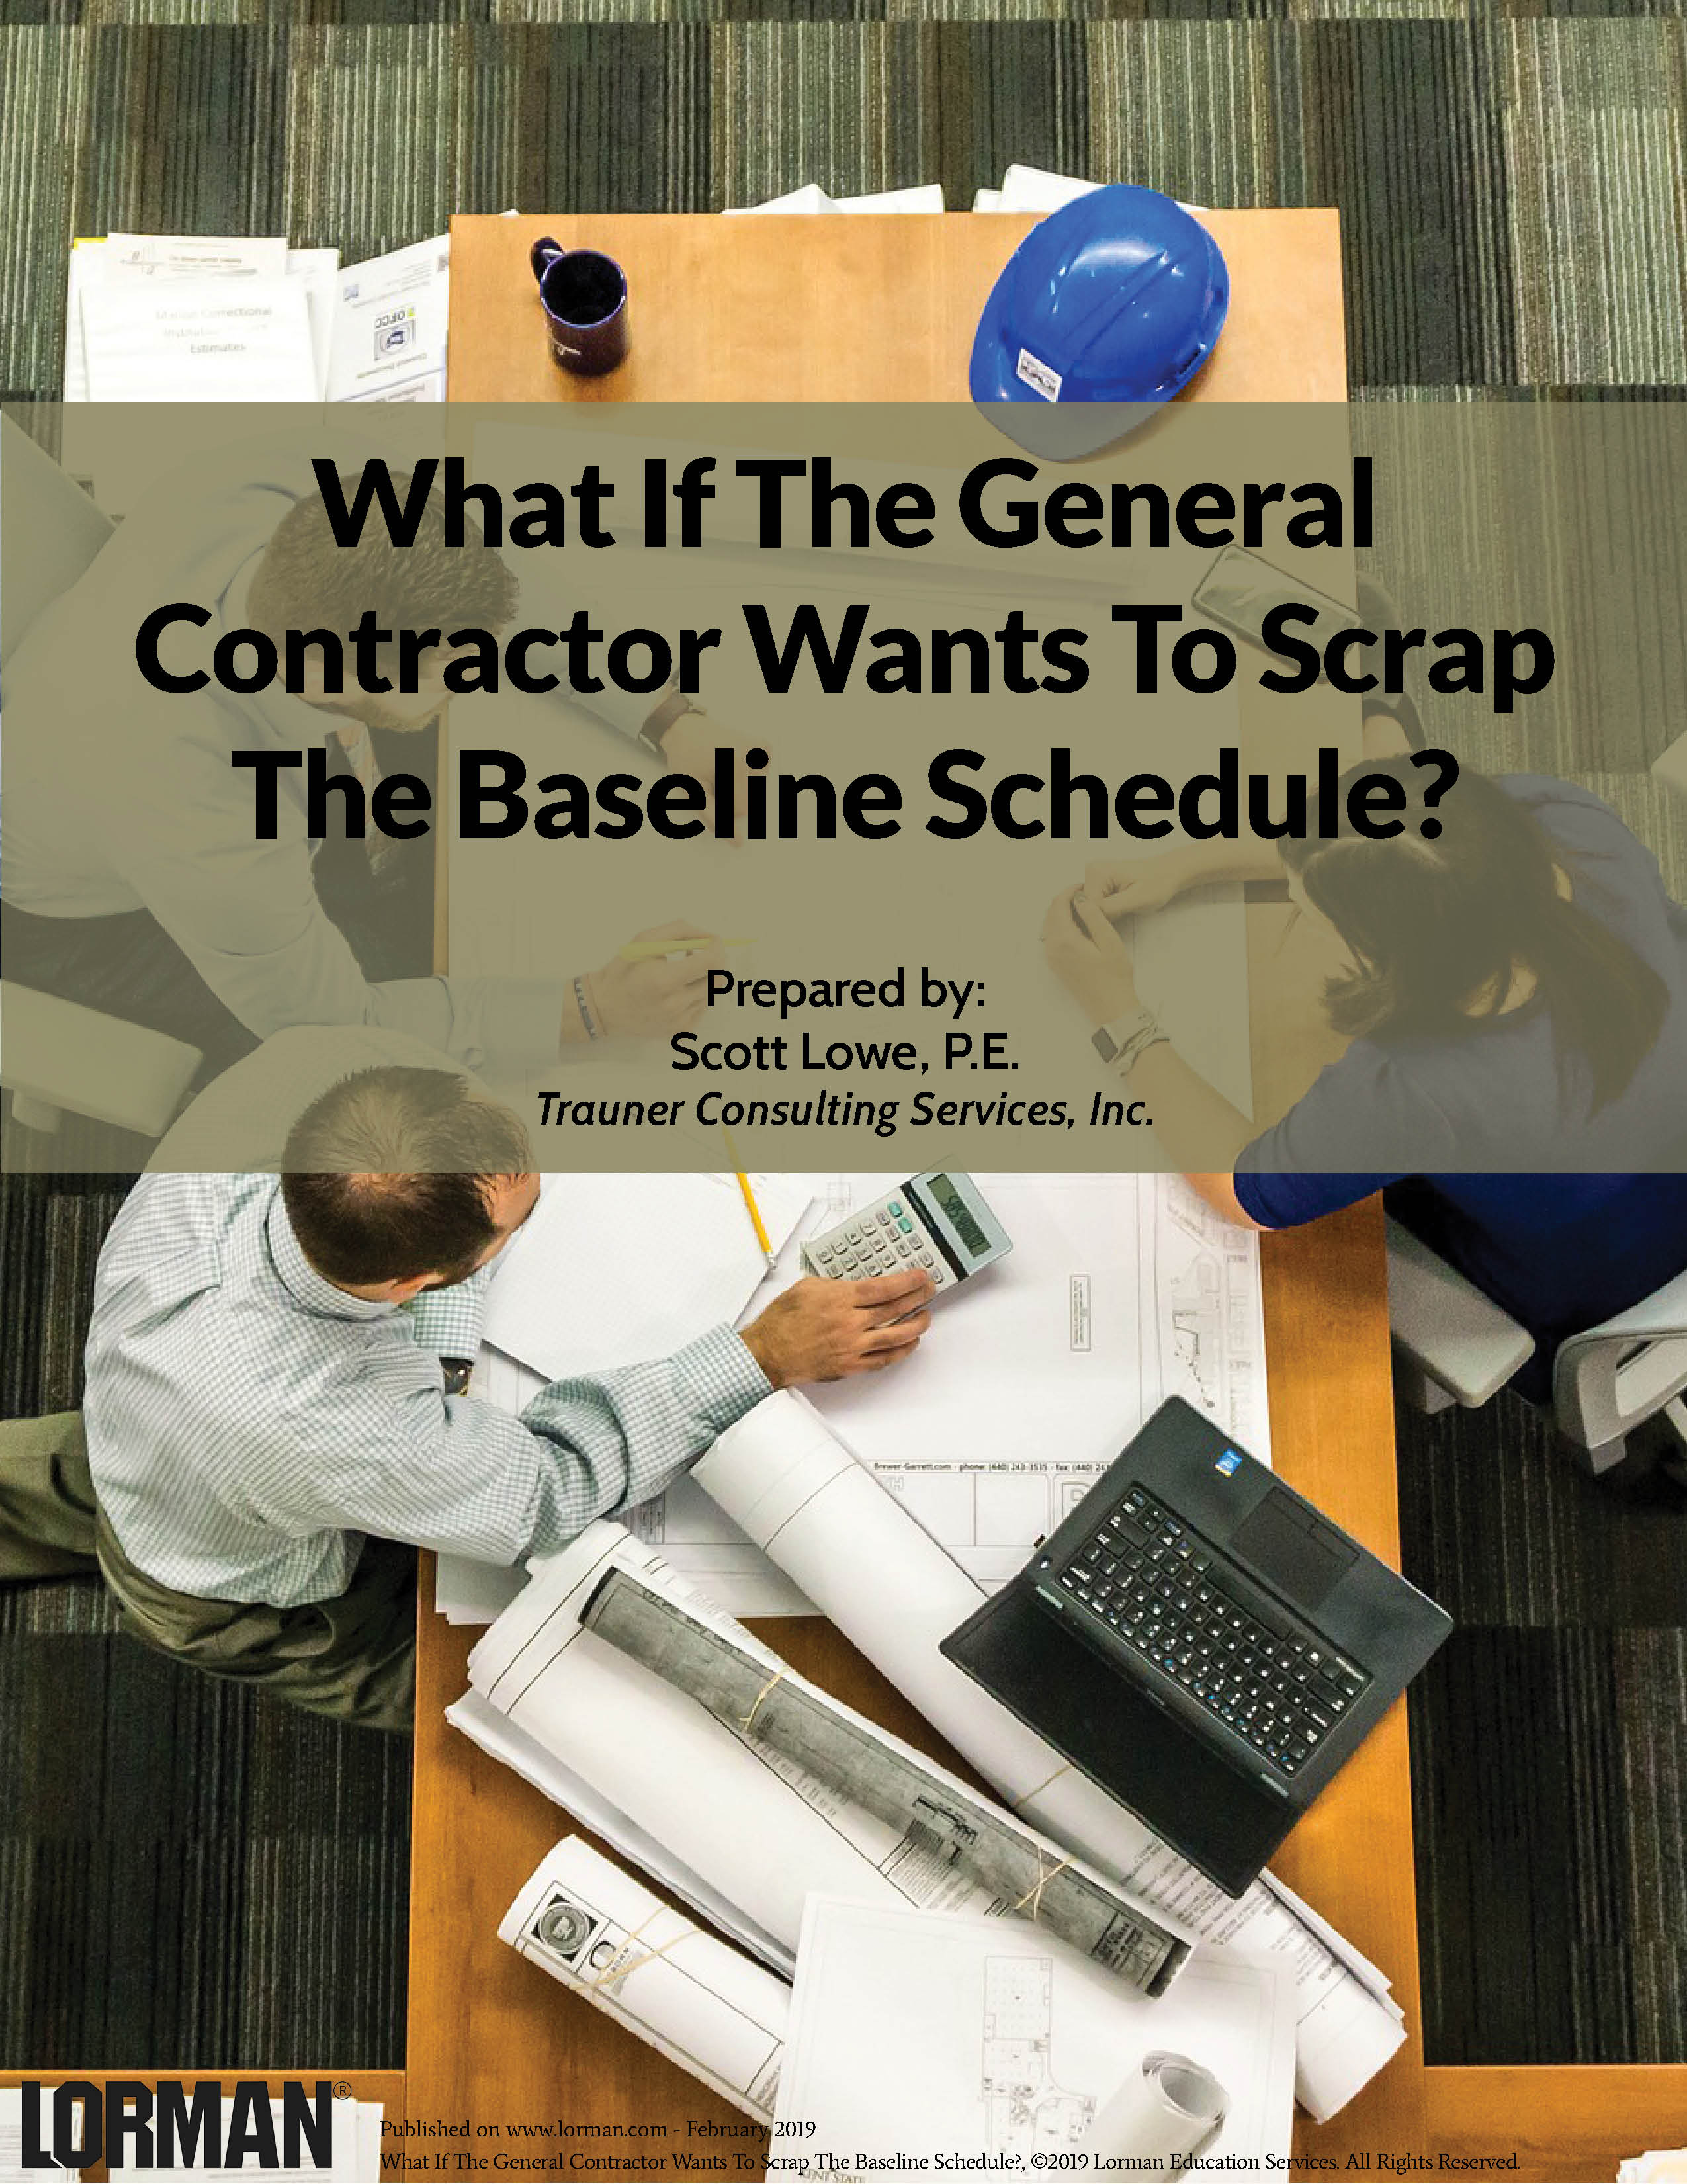 What If The General Contractor Wants To Scrap The Baseline Schedule?